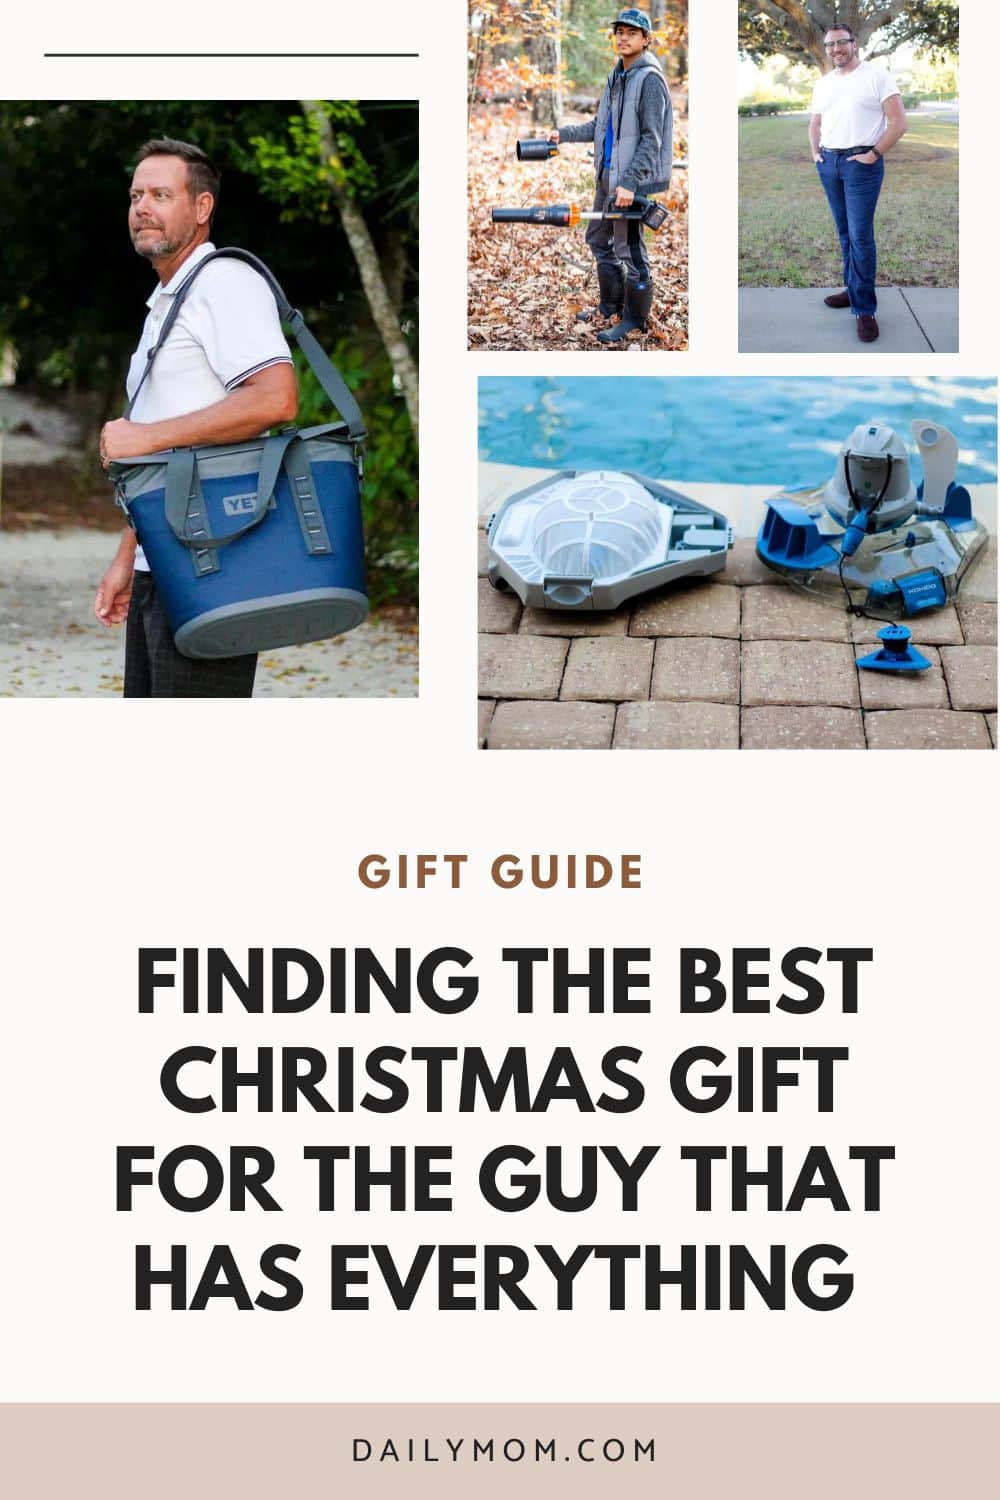 Find The Best Christmas Gift For The Guy That Has Everything - 20+ Santa Approved Ideas 118 Daily Mom, Magazine For Families